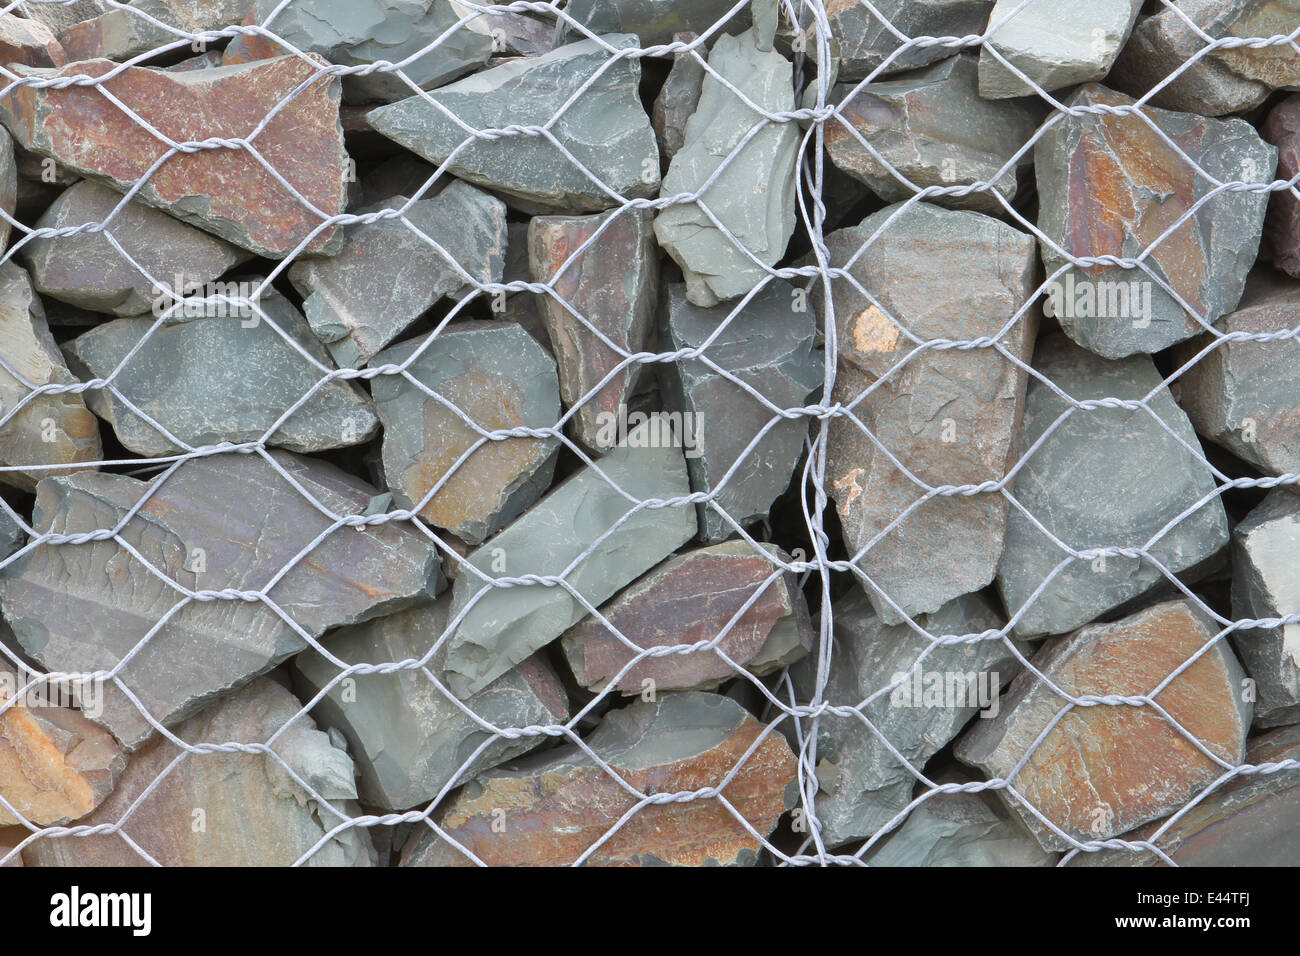 Rock fence with split rock and hexagonal like wire similar to chicken wire. Stock Photo